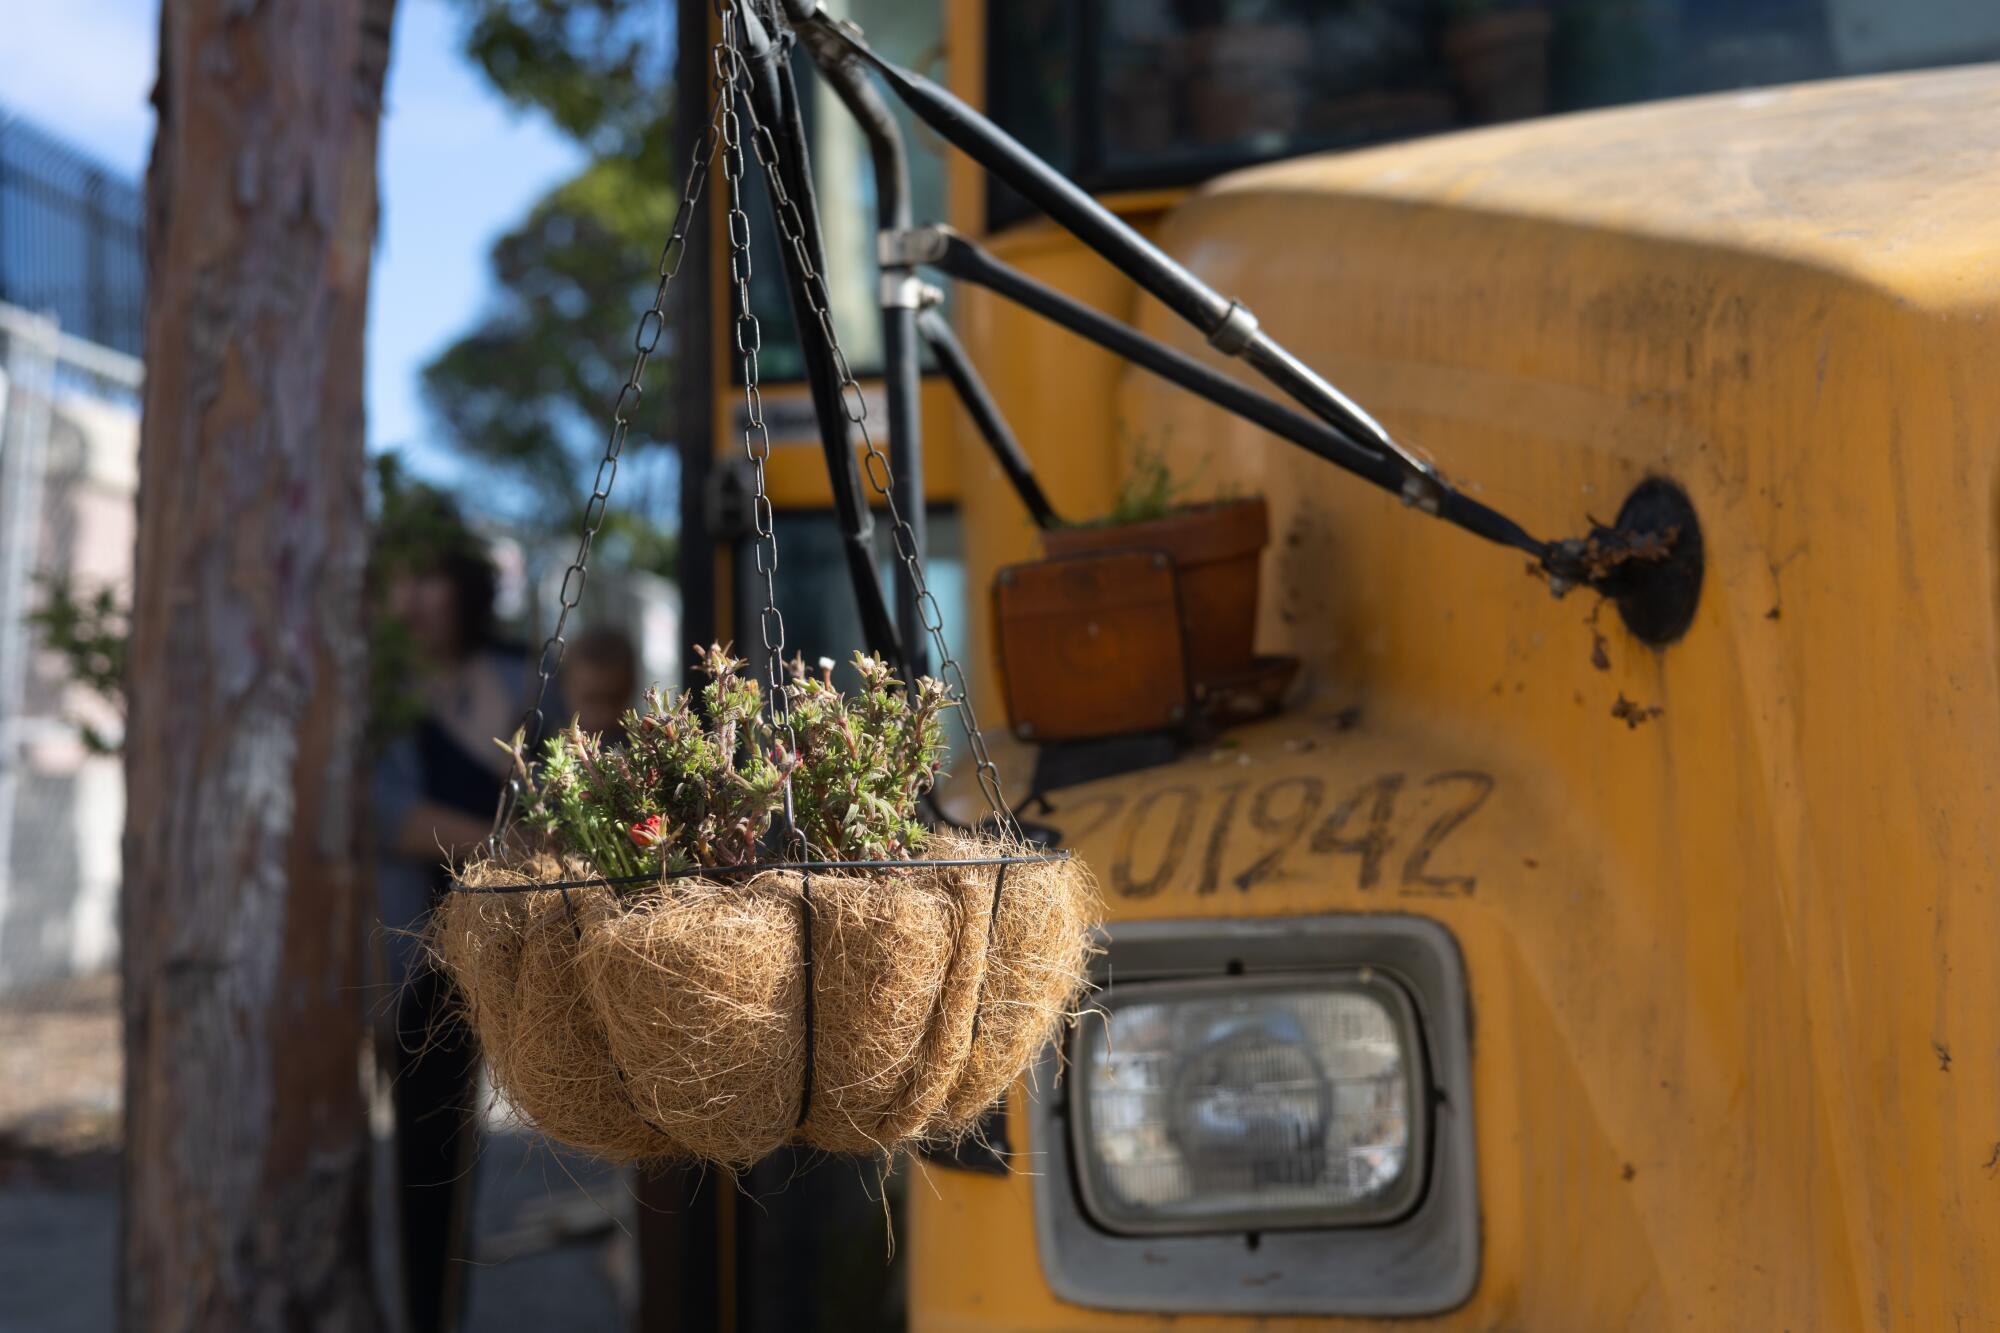 A plant hangs from a rearview mirror of a used bus.